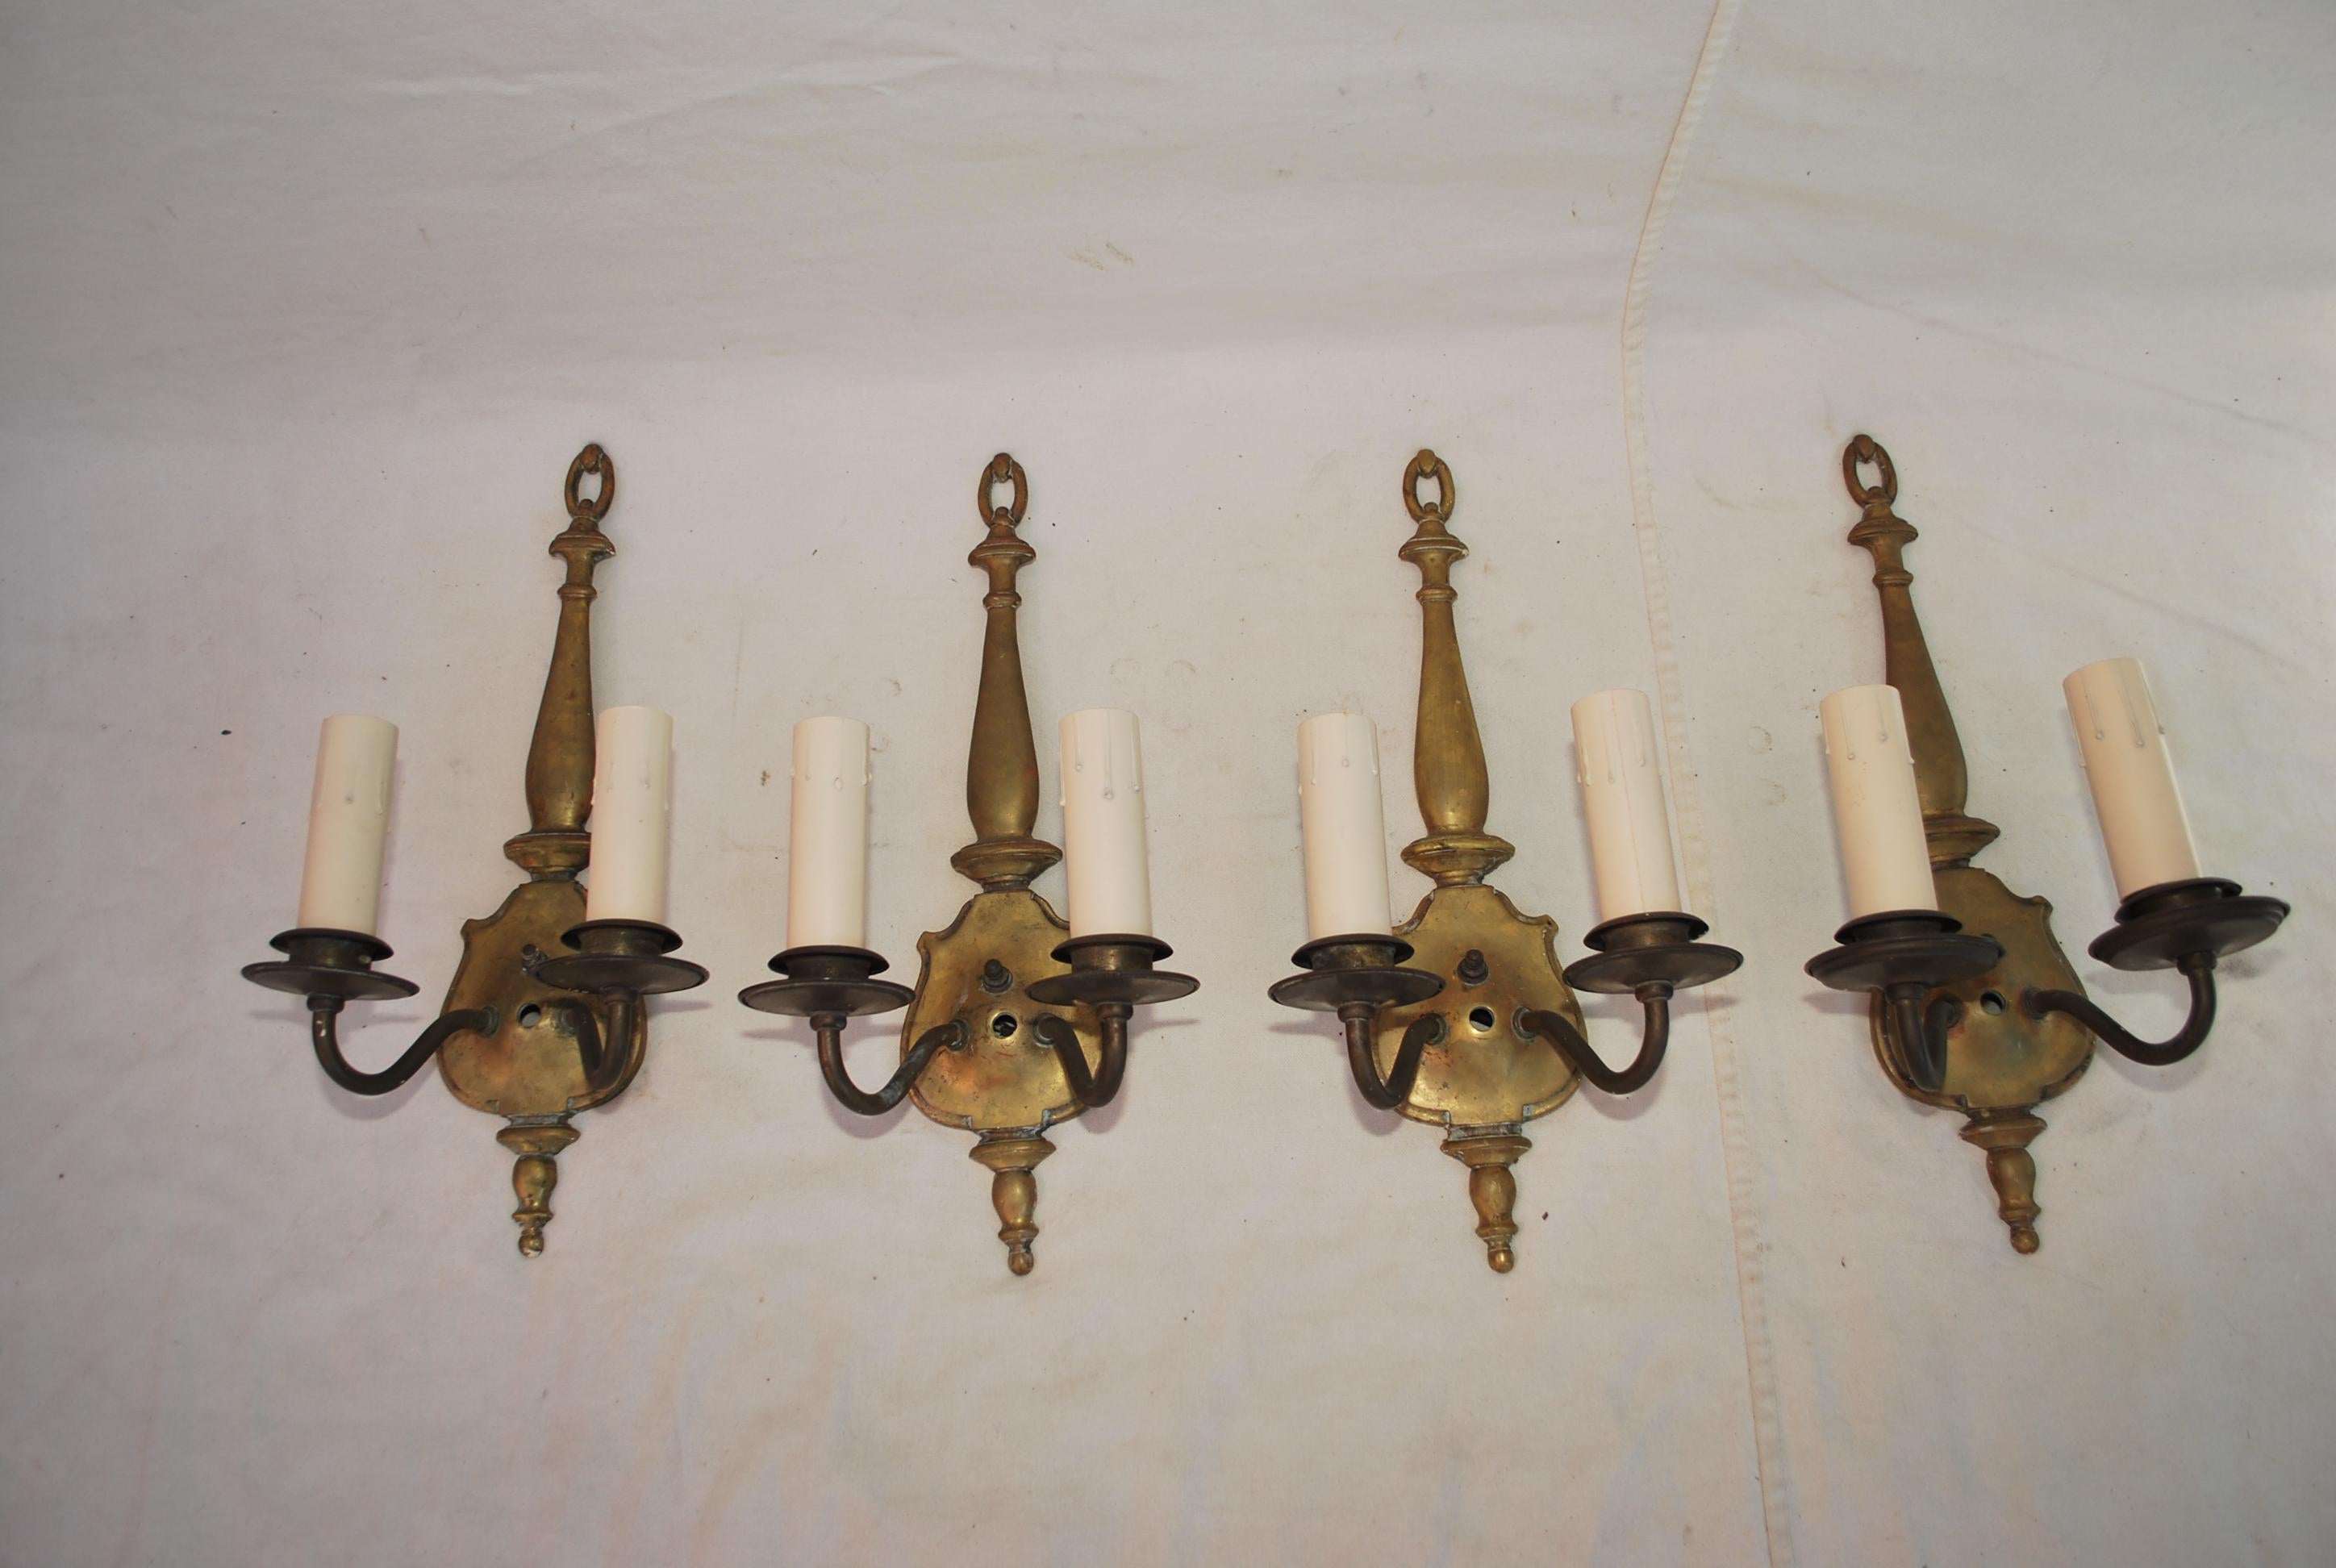 A very nice set of four 1920's brass sconces, the patina is much nicer in person.